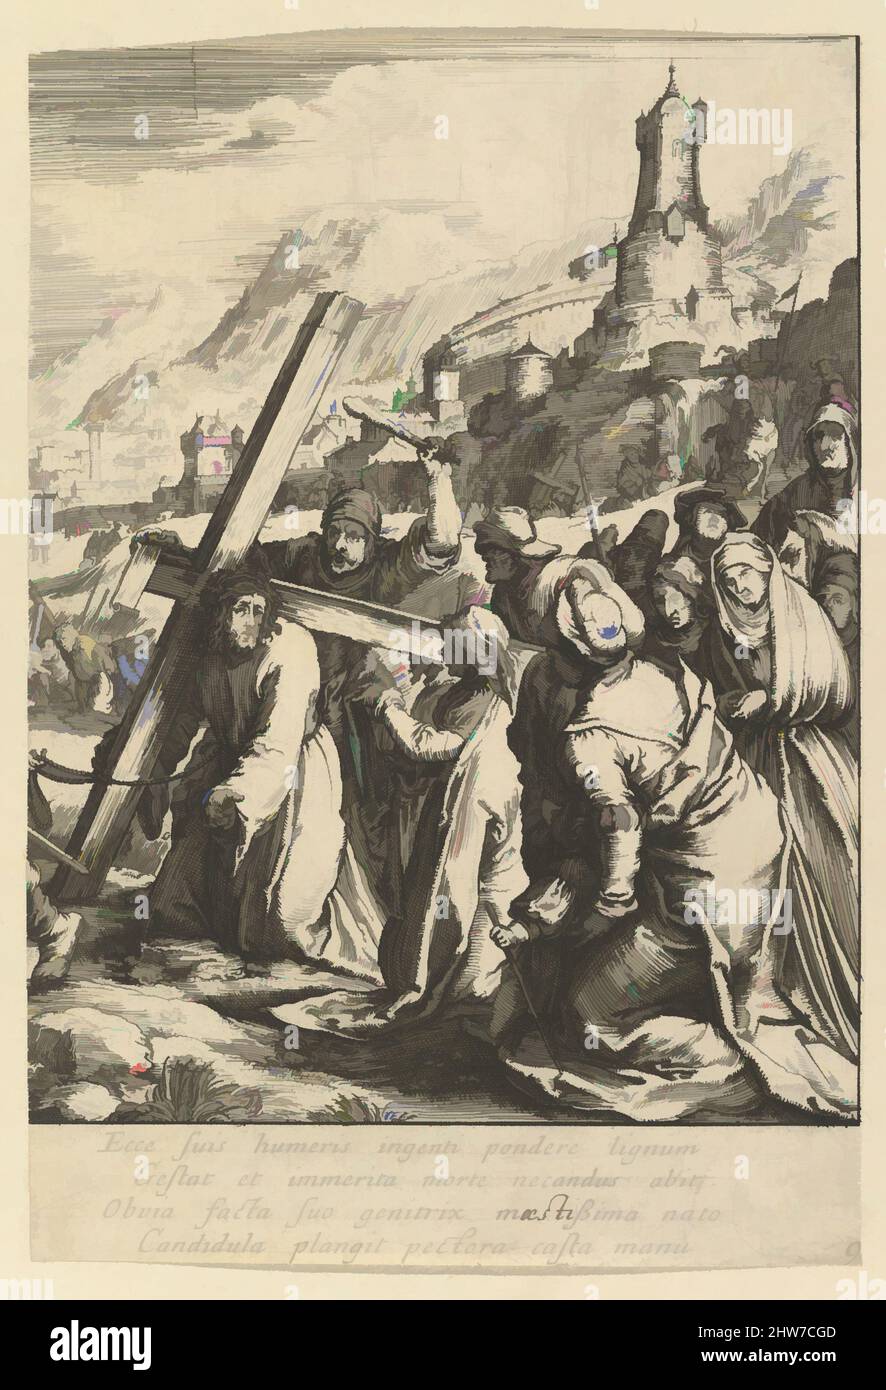 Art inspired by Christ Carrying the Cross, from The Passion of Christ, mid 17th century, Etching, Sheet: 5 3/4 x 3 7/8 in. (14.6 x 9.9 cm), Prints, Nicolas Cochin (French, Troyes 1610–1686 Paris), After Hendrick Goltzius (Netherlandish, Mühlbracht 1558–1617 Haarlem, Classic works modernized by Artotop with a splash of modernity. Shapes, color and value, eye-catching visual impact on art. Emotions through freedom of artworks in a contemporary way. A timeless message pursuing a wildly creative new direction. Artists turning to the digital medium and creating the Artotop NFT Stock Photo